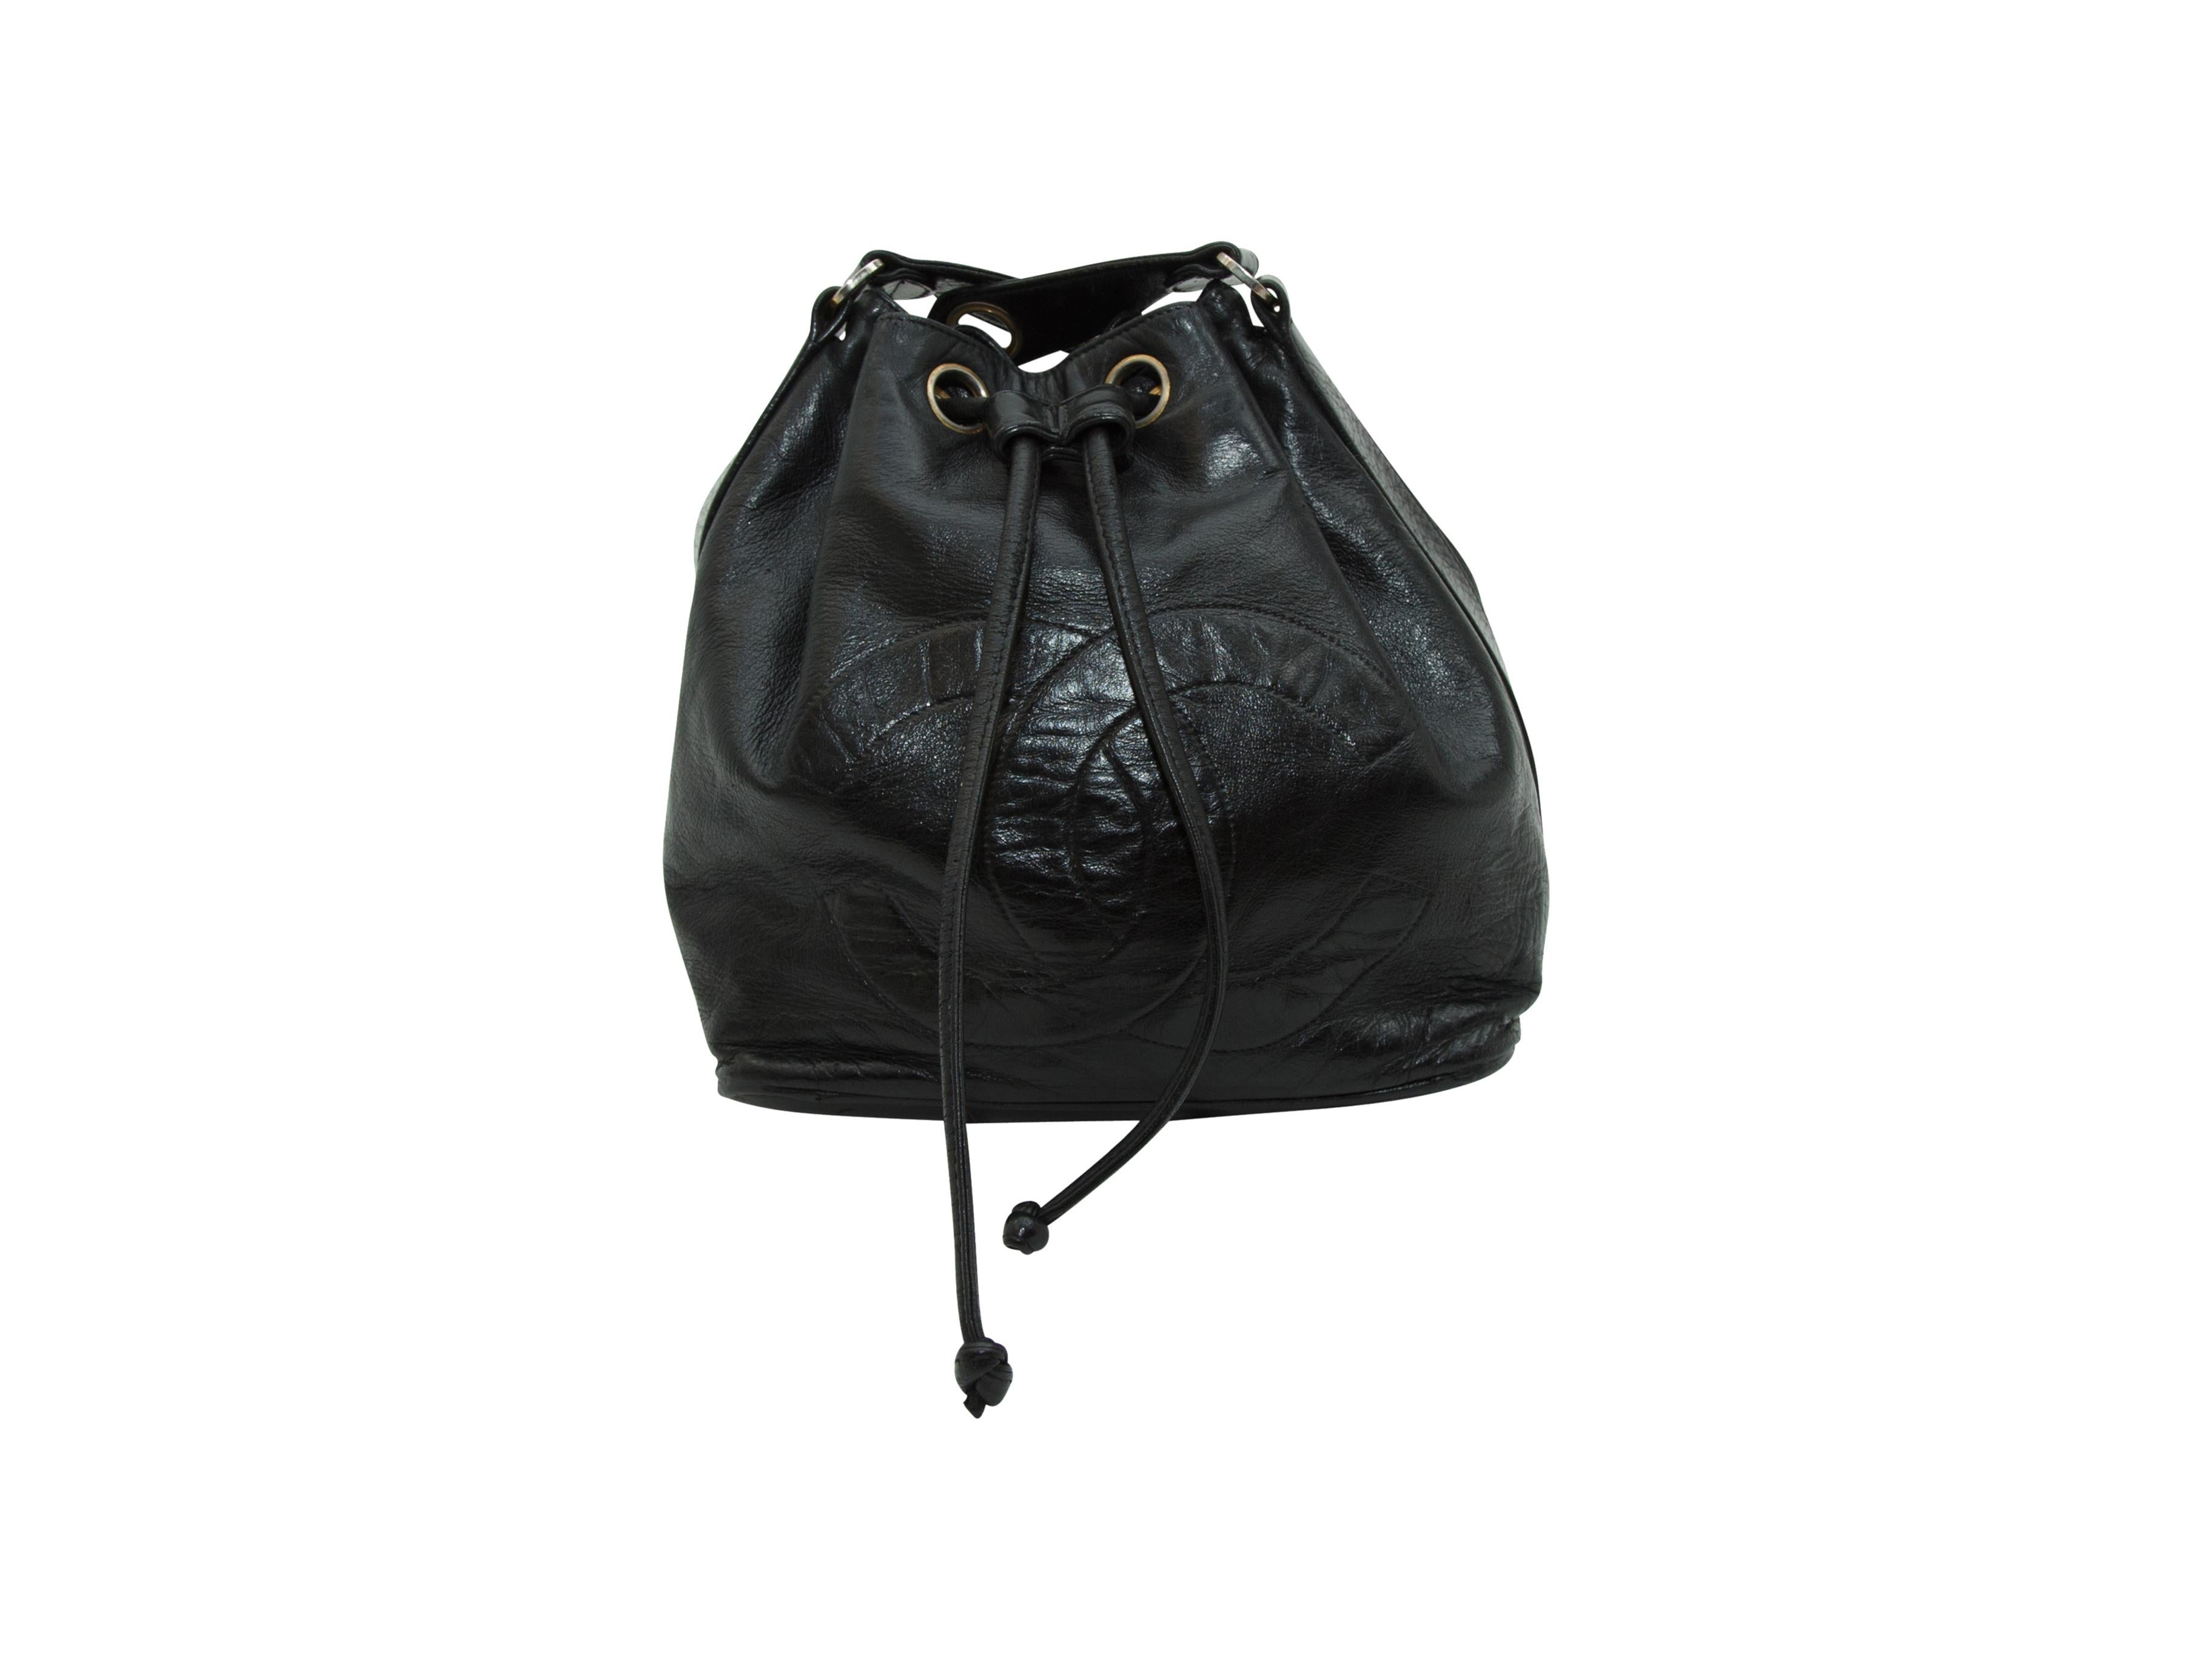 Product details:  Vintage black leather bucket bag by Chanel.  Leather and chain crossbody strap.  Drawstring top closure.  Leather lined interior.  Front logo accent.  Goldtone hardware.  11